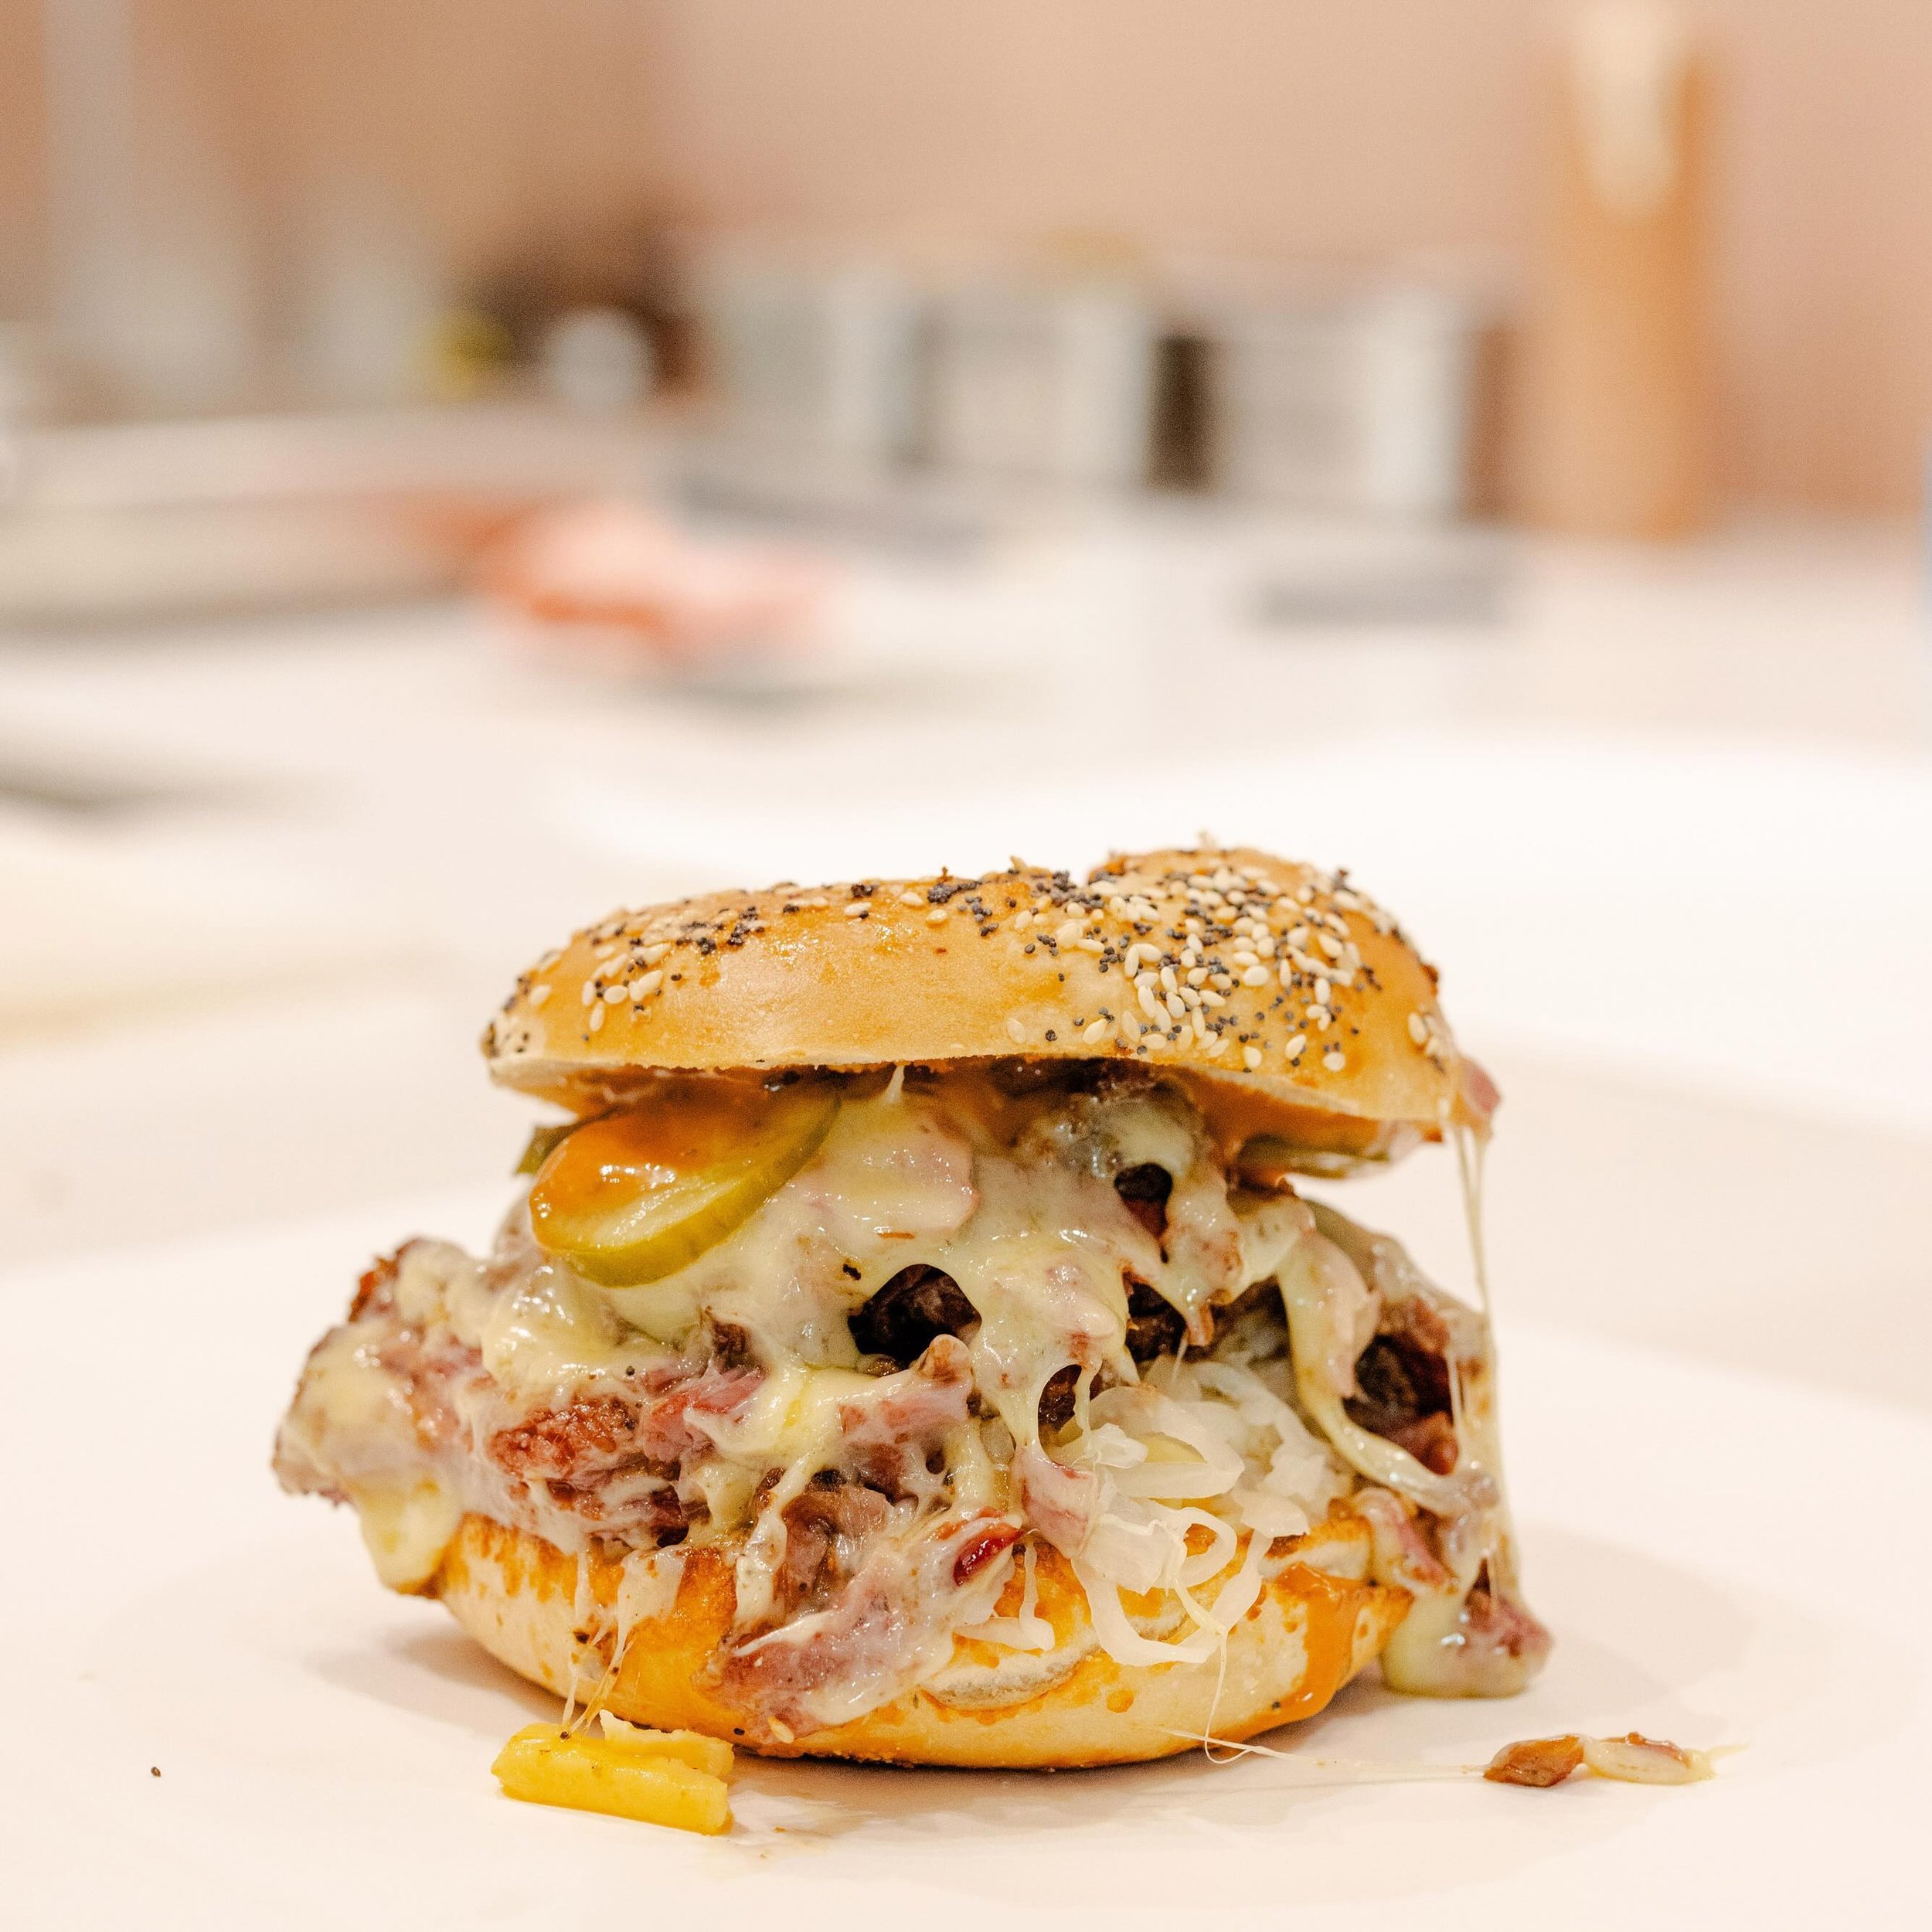 Got a case of the Mondayitis? The Reuben can help. 

Order ahead for pick up on our website or UberEats to home. 

#Neighbourhoodbagel #neighbourhoodbagel #bagel #bagels #perthbagels #bagelshop #bagelstore #nycbagels #newyork #newyorkbagels #reuben #